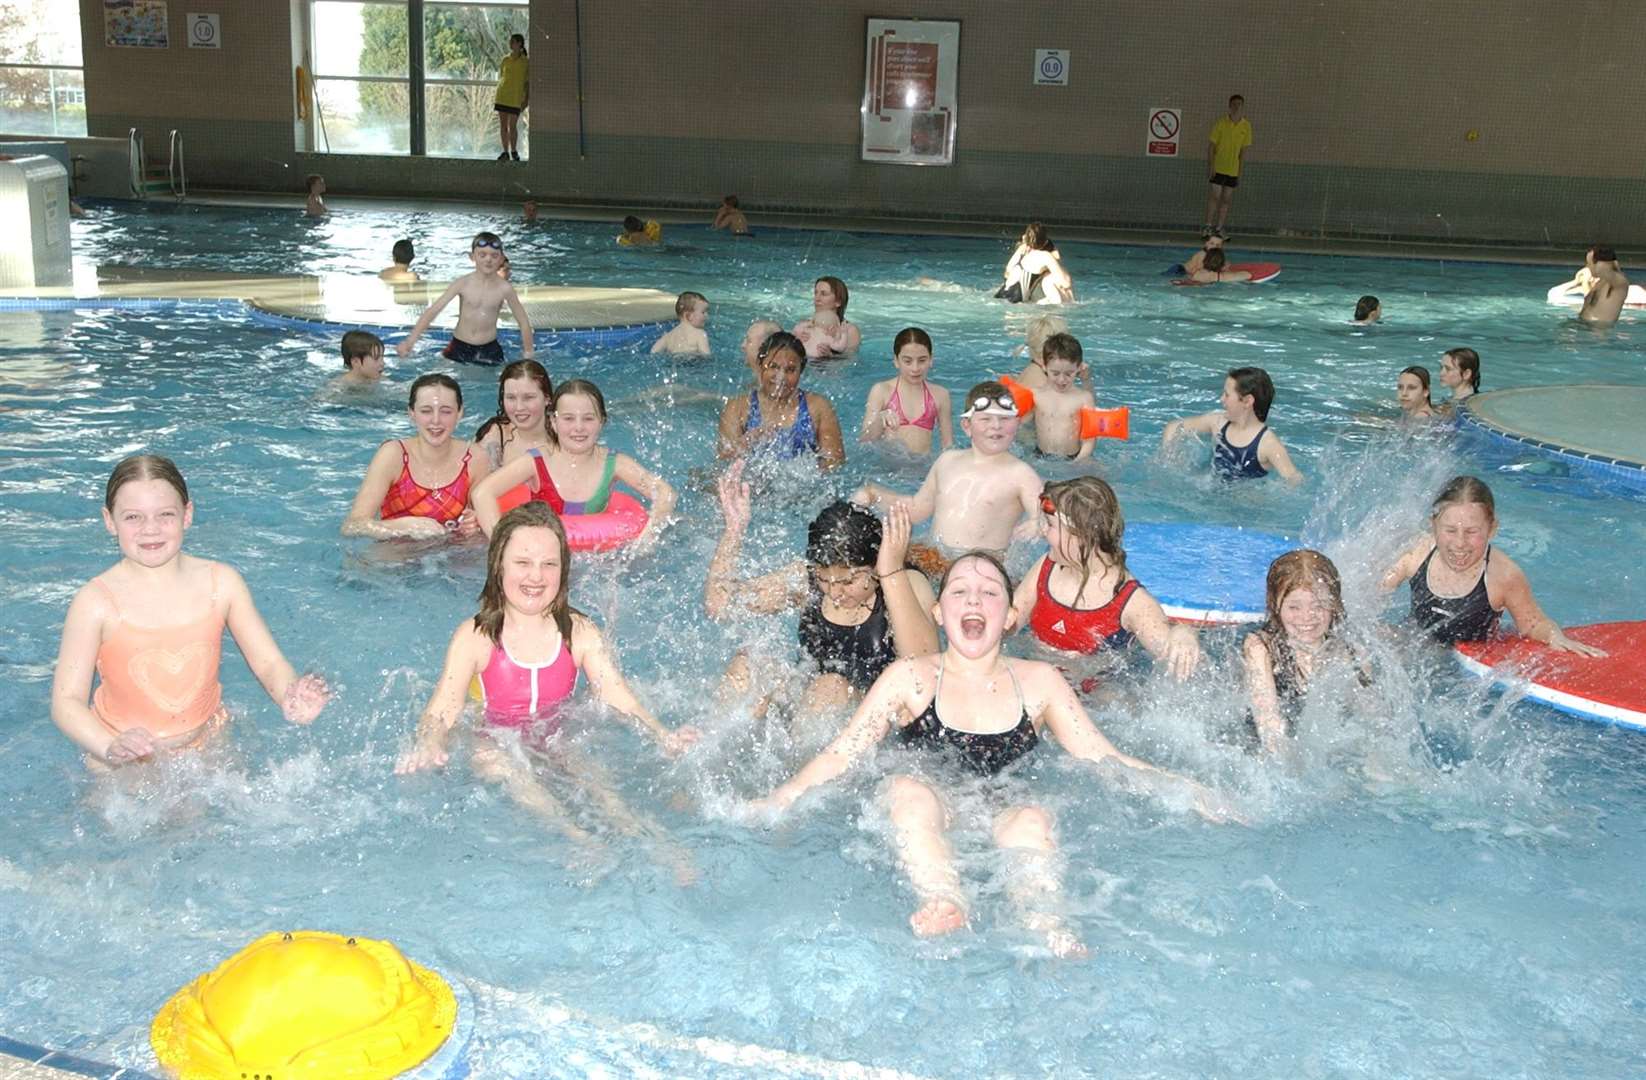 Customers enjoying the pool when it re-opened after repairs in 2003